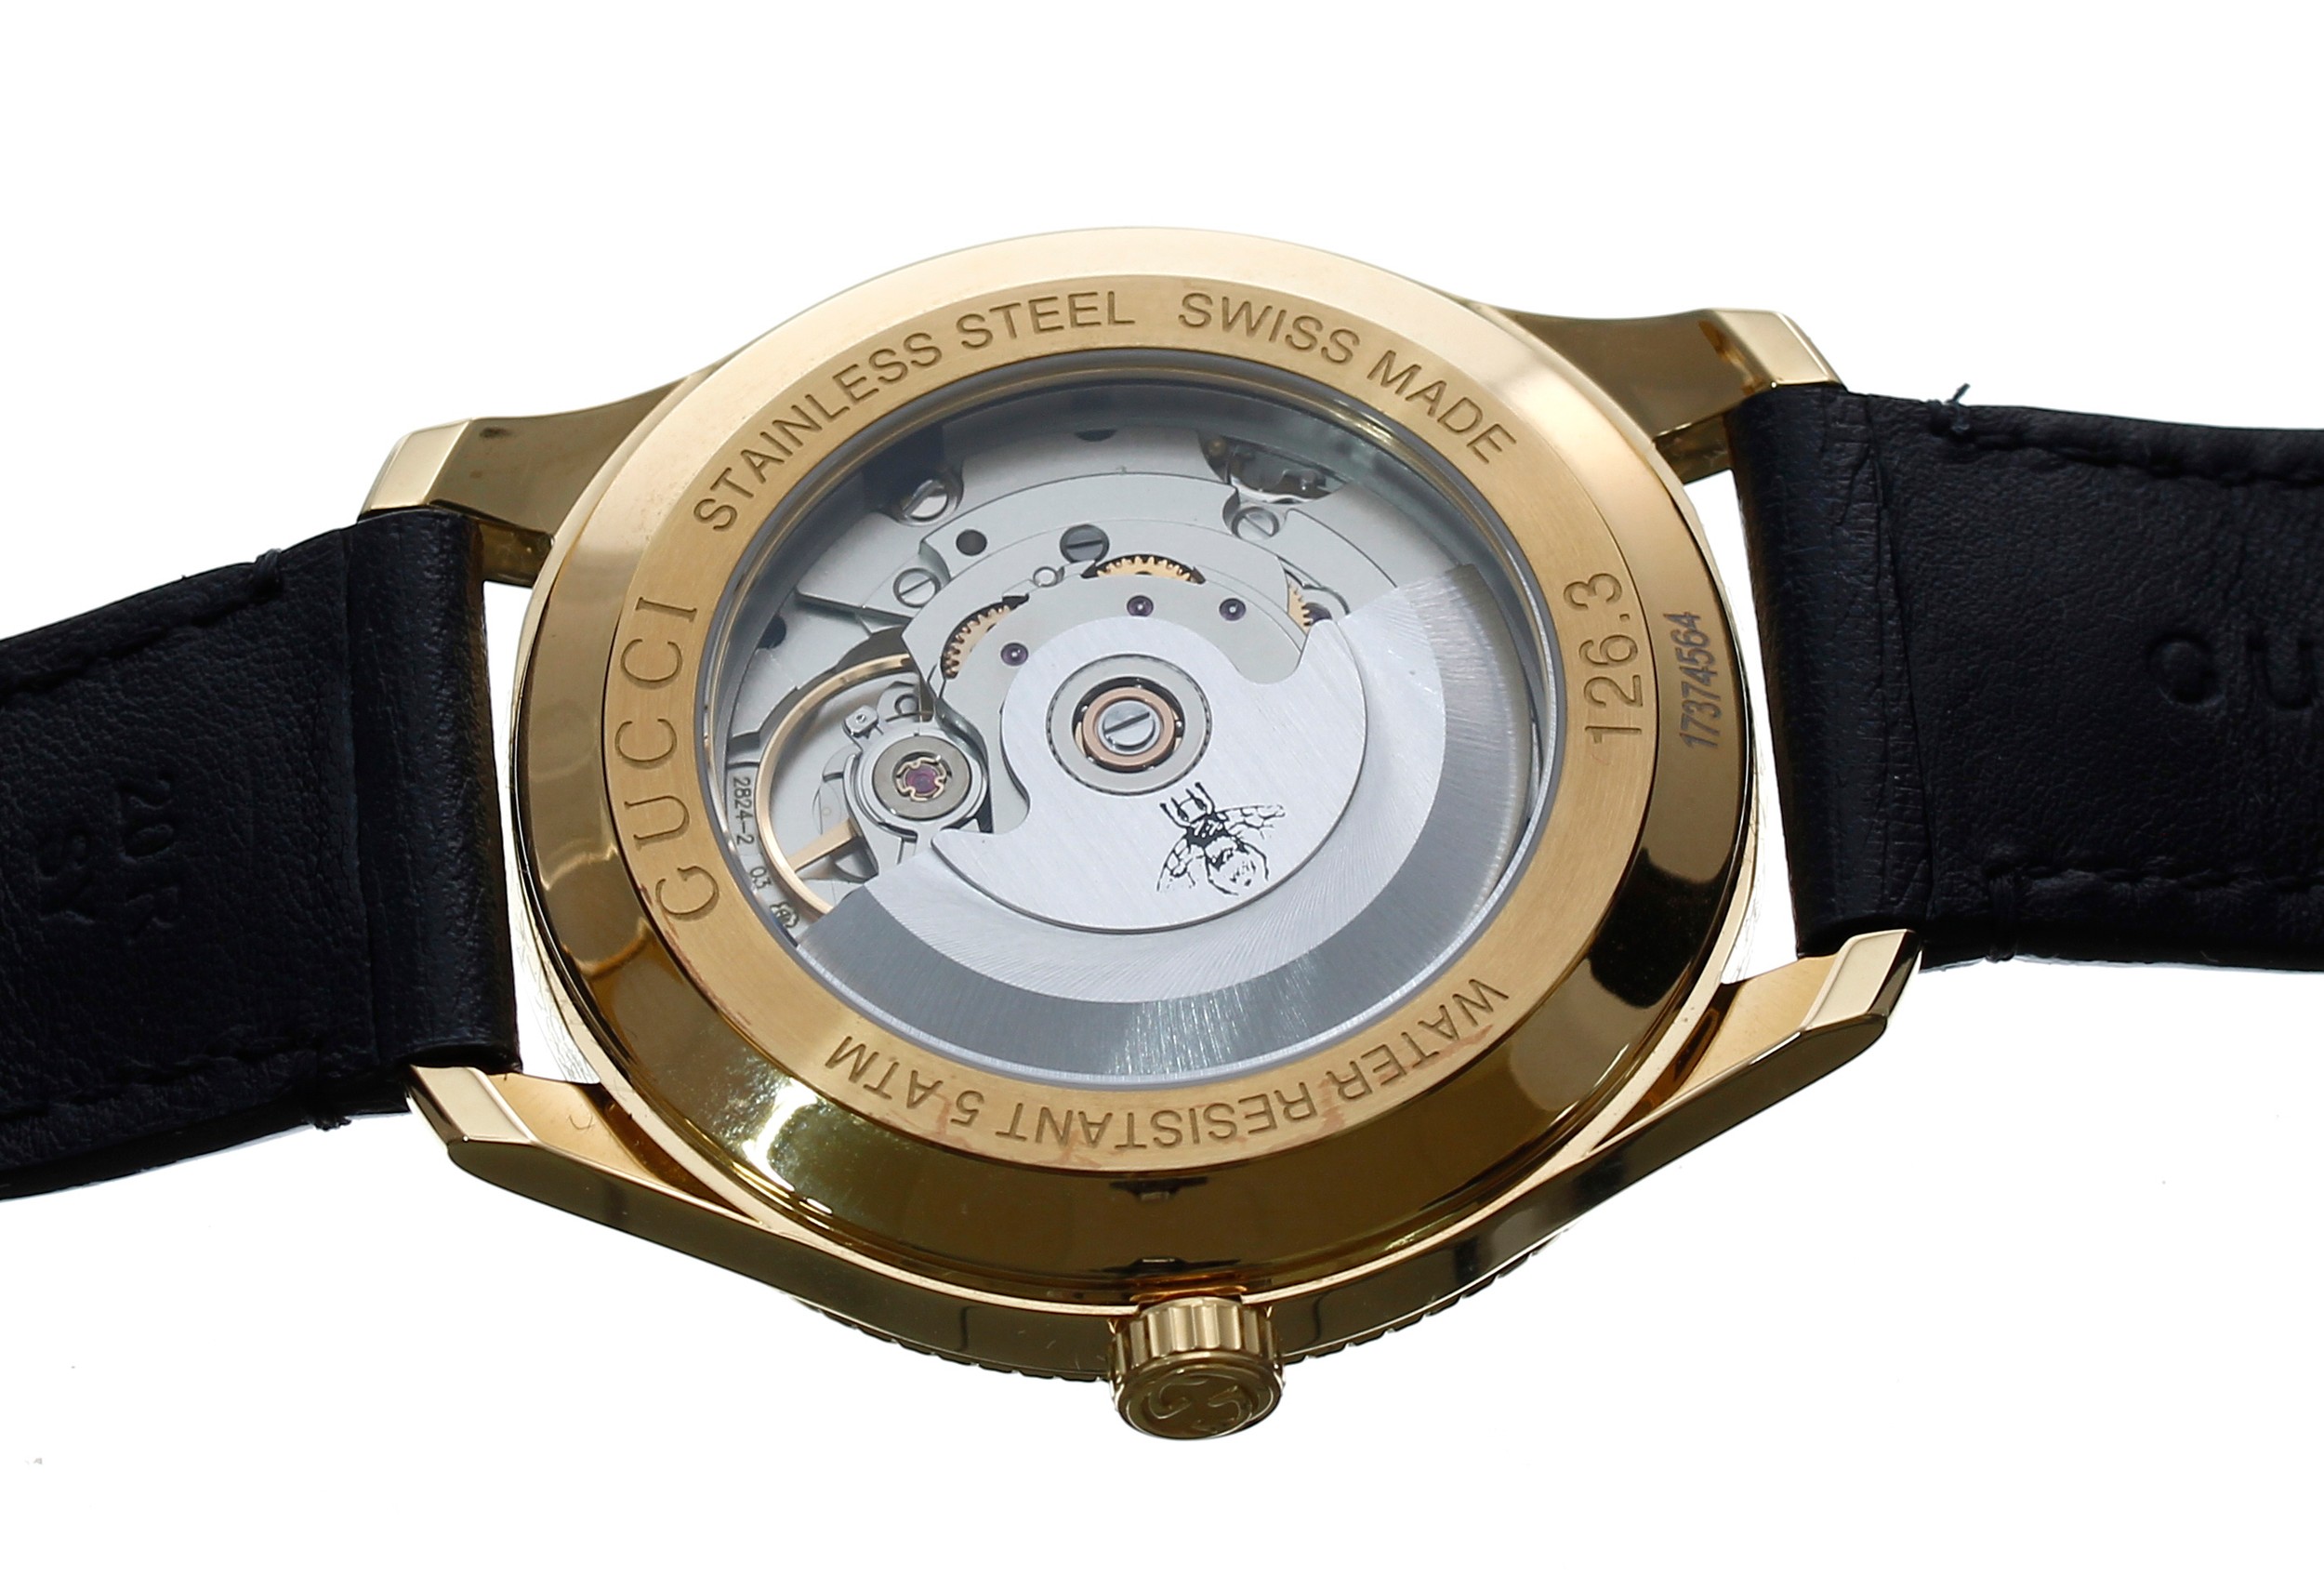 Gucci G-Timeless automatic gold plated gentleman's wristwatch, reference no. 126.3, circa 2018, - Image 2 of 3